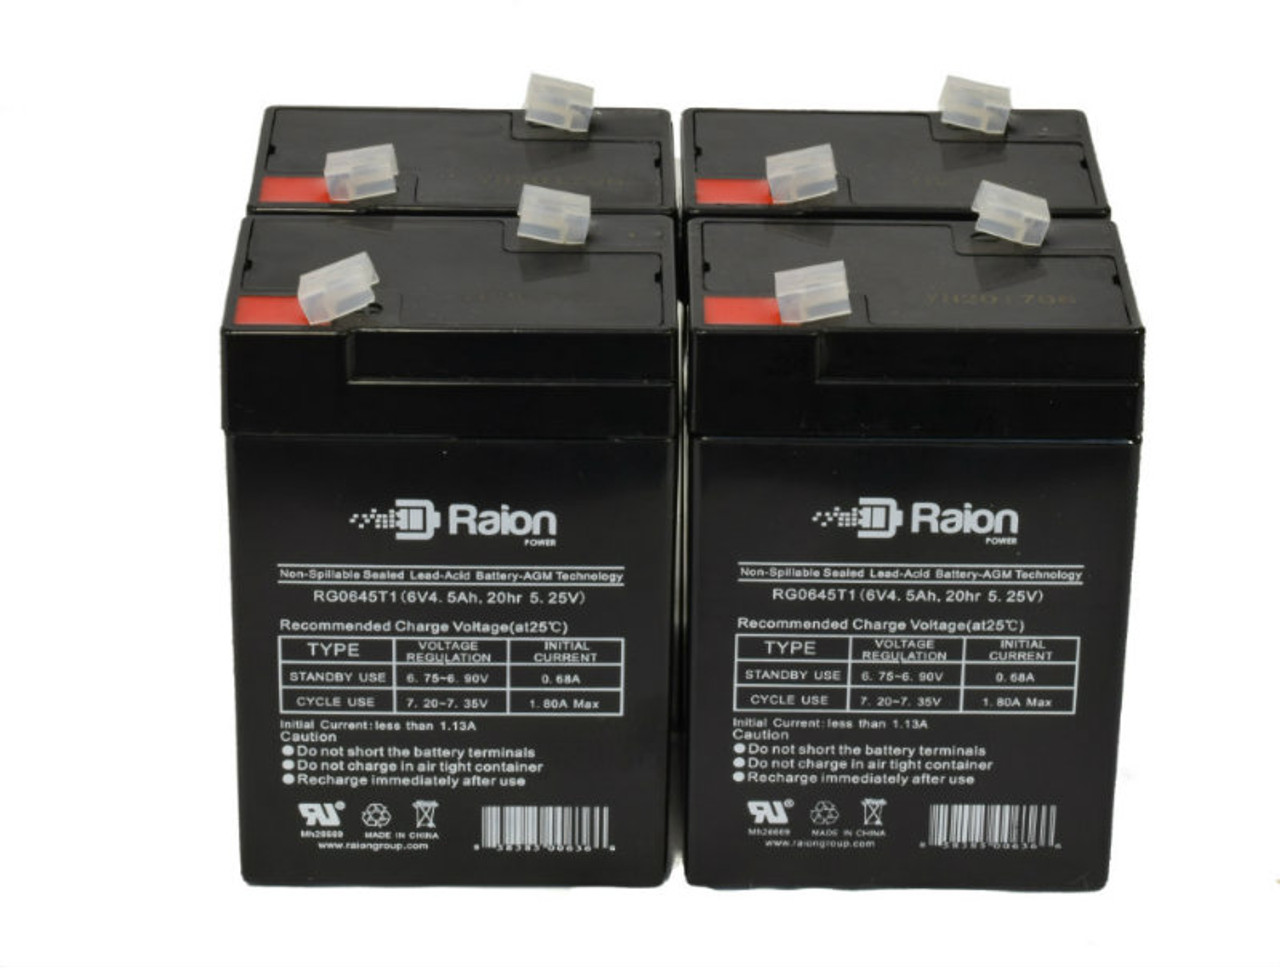 Raion Power 6 Volt 4.5Ah RG0645T1 Replacement Battery for Narada 3-FM-4 - 4 Pack